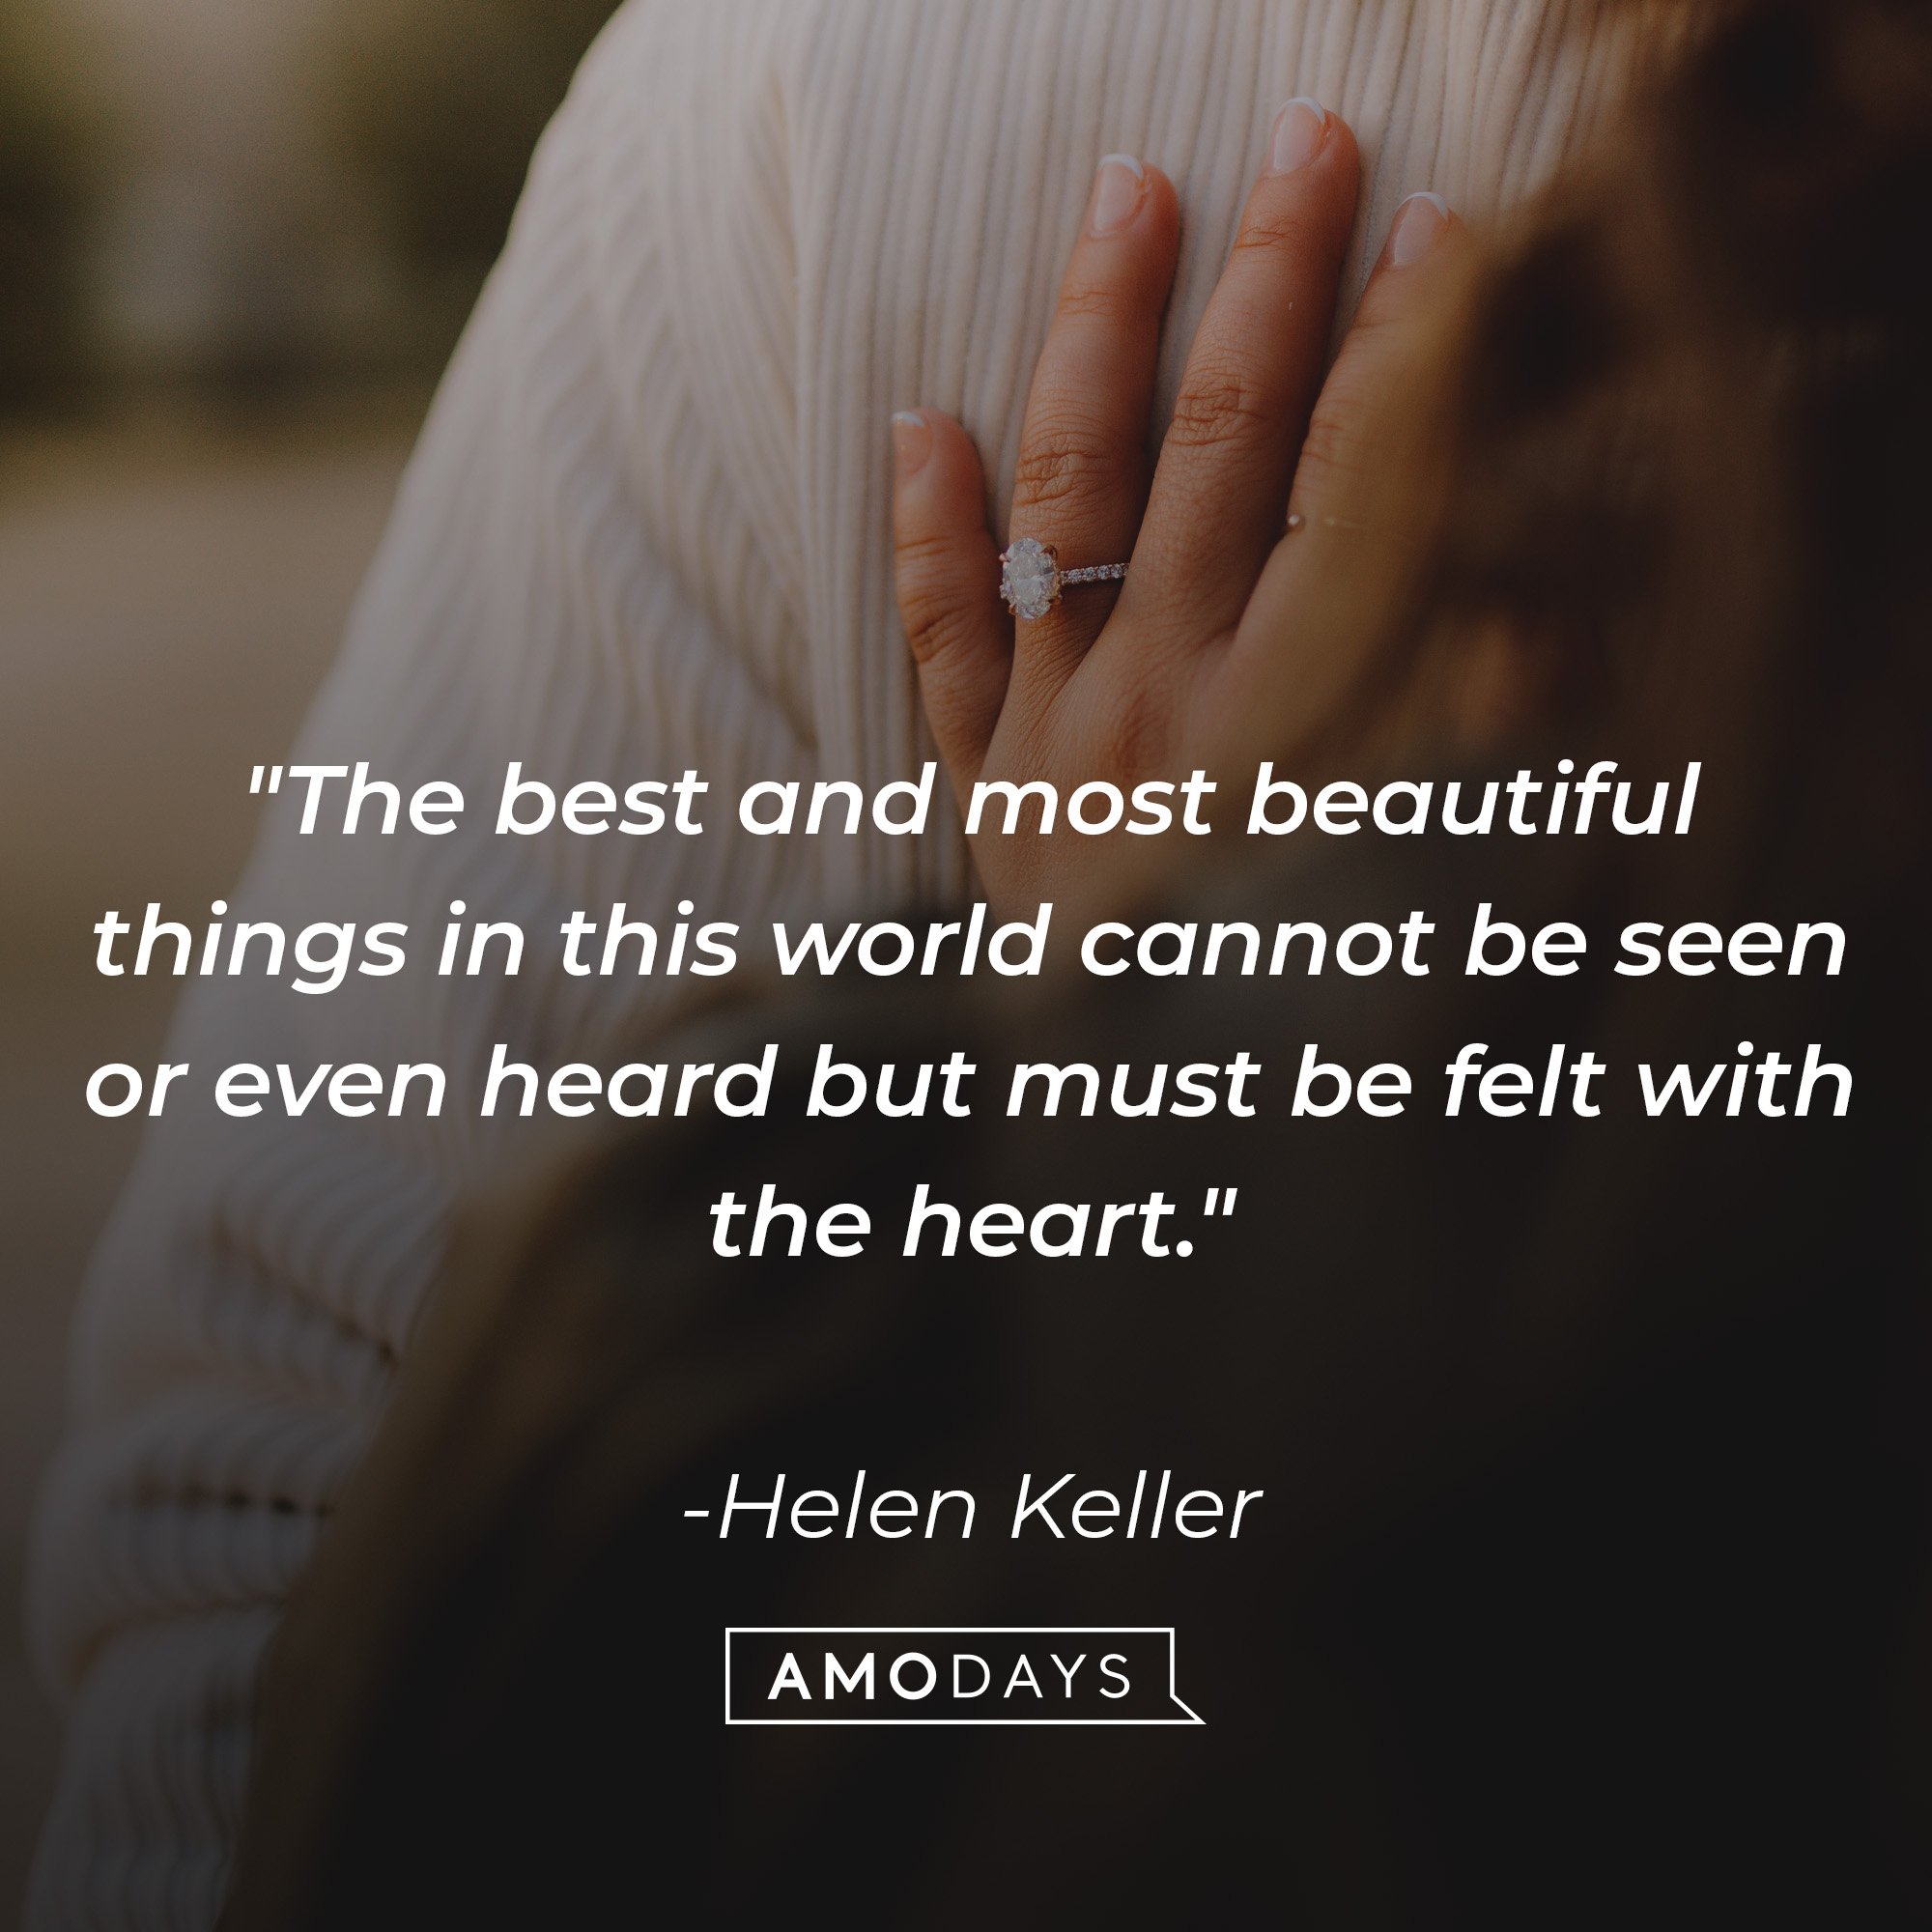 Helen Keller's quote: "The best and most beautiful things in this world cannot be seen or even heard but must be felt with the heart." | Image: AmoDays